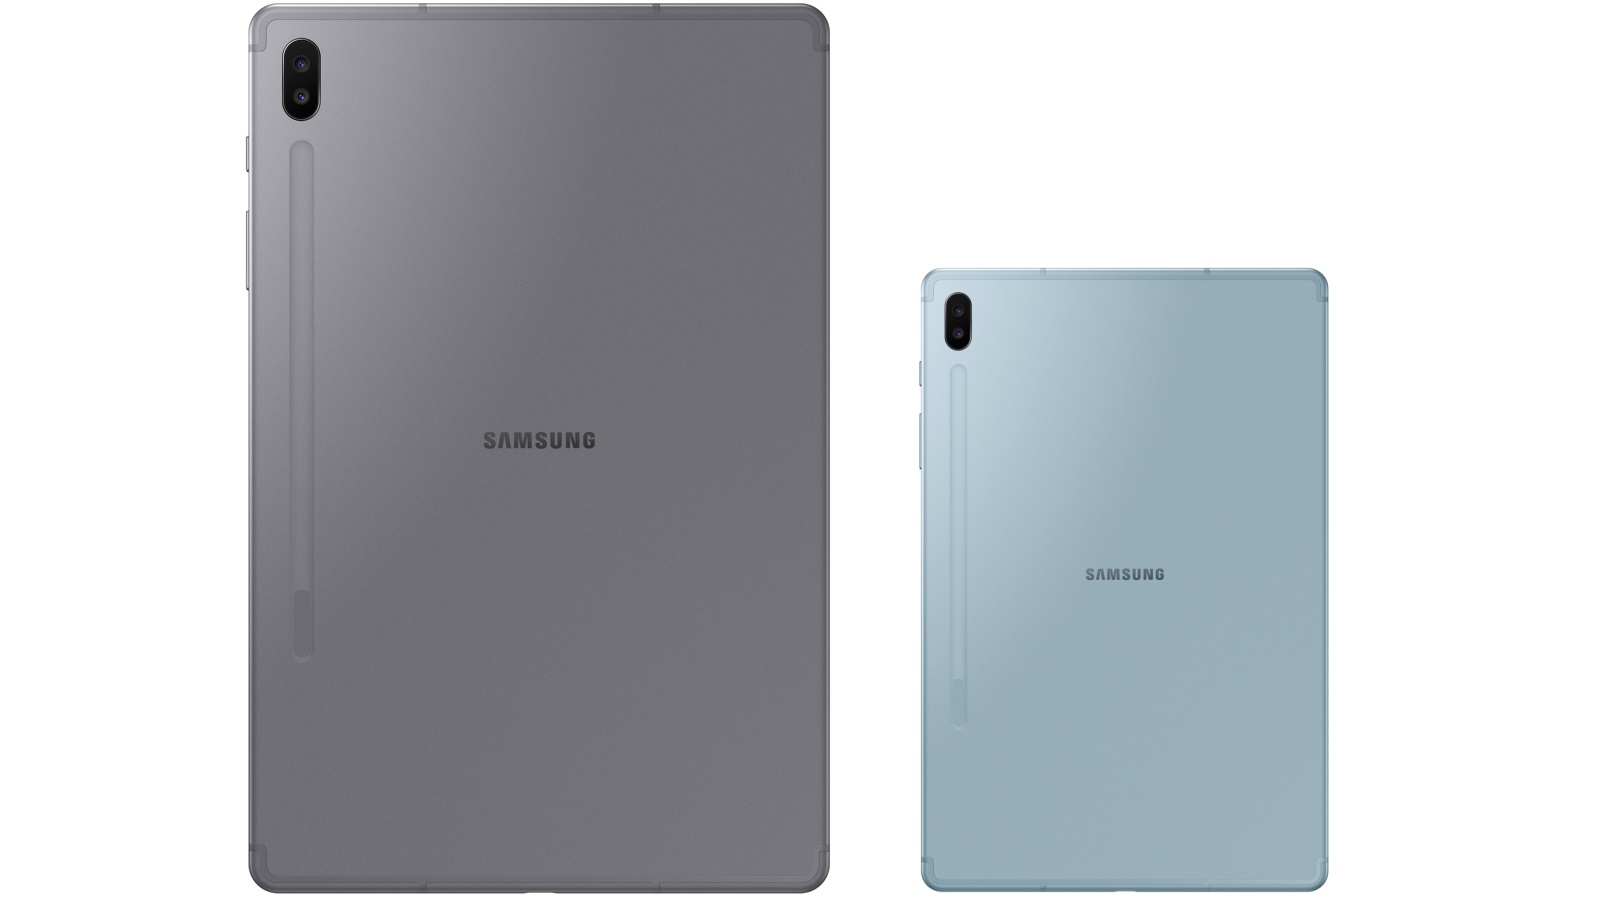 Samsung confirms the existence of Galaxy Tab S6 5G variant